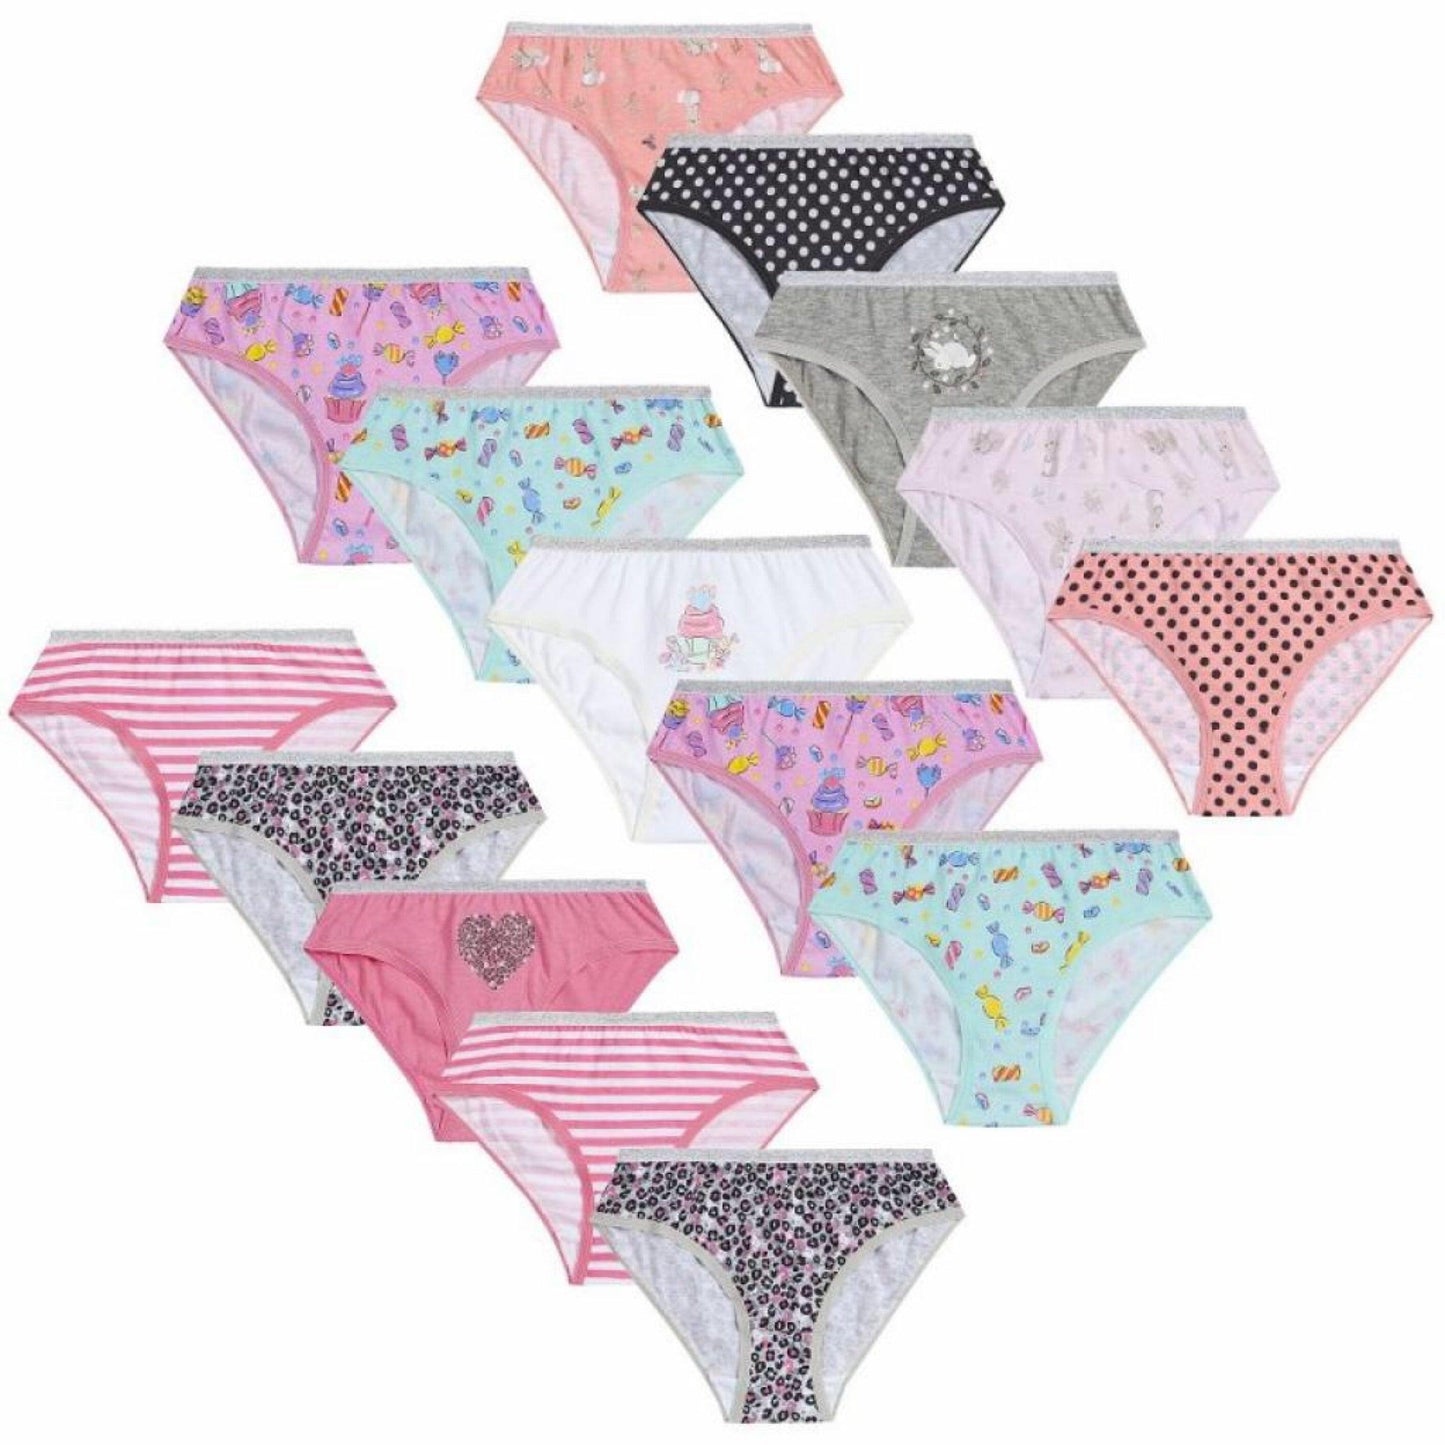 Girls 5 Pack of Briefs | Oscar & Me | Baby & Children’s Clothing & Accessories